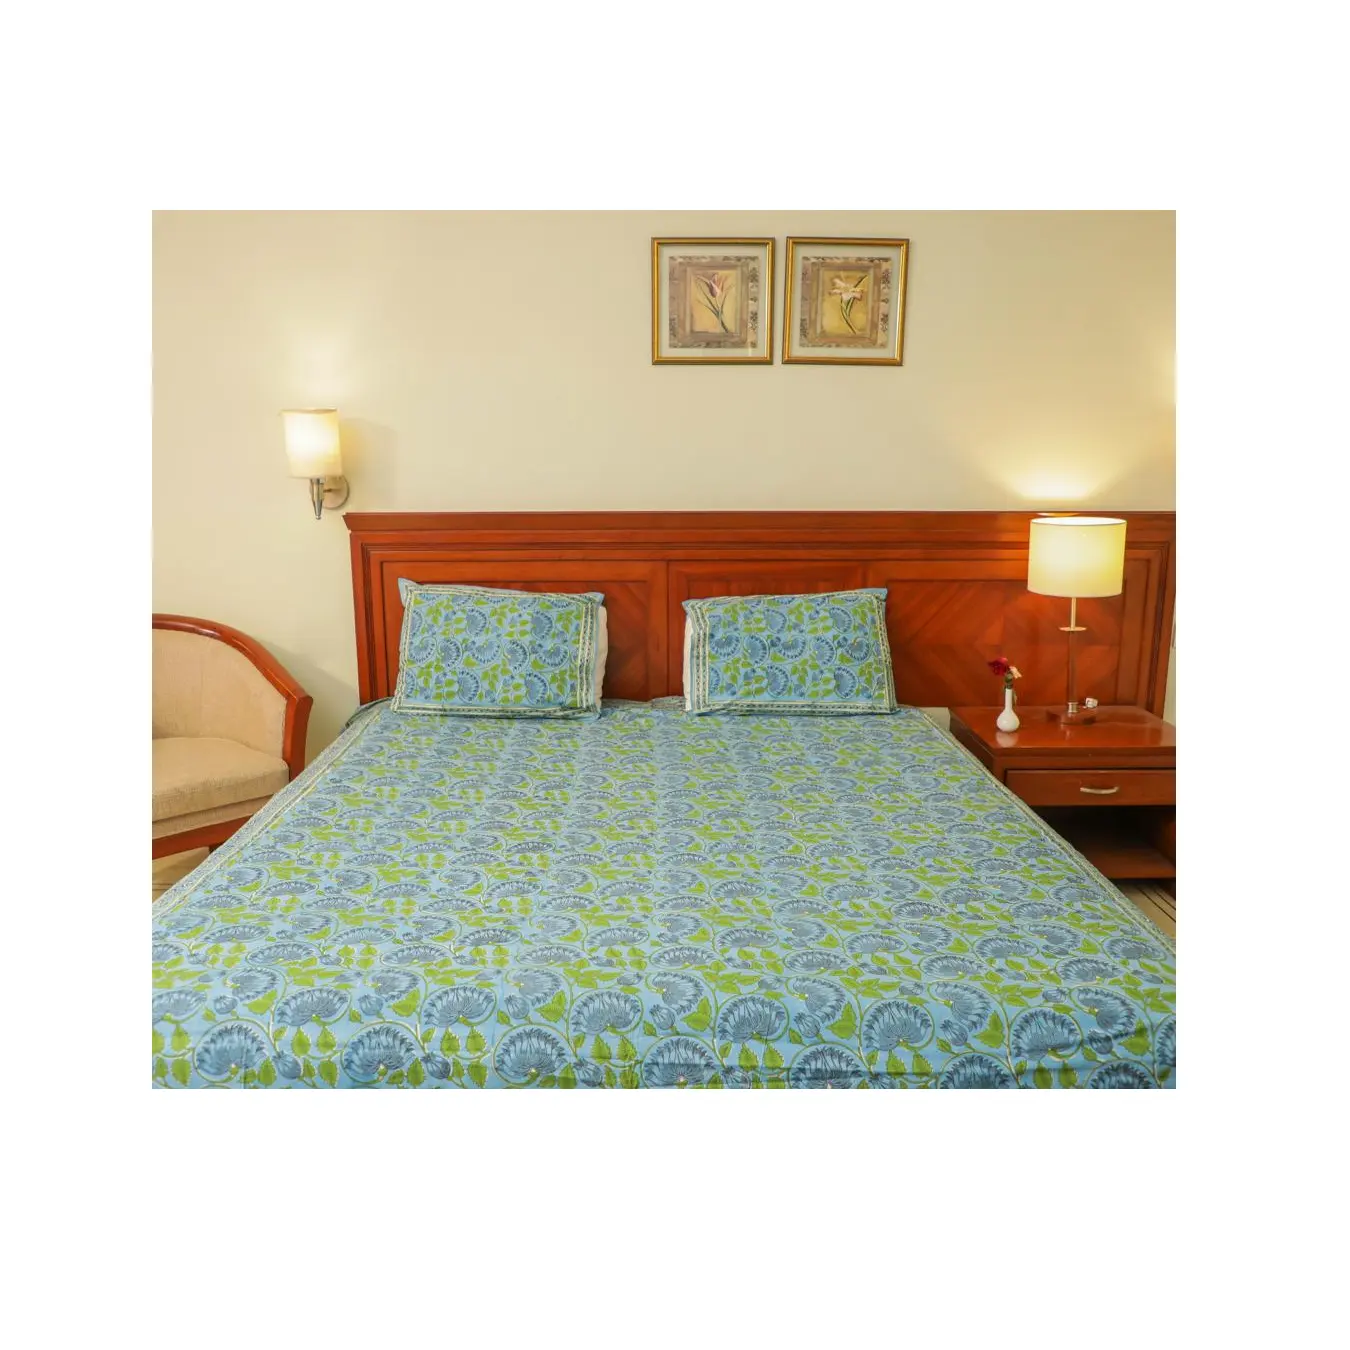 Hot Selling Bedding Set with Cotton Made & Soft Feel Printed Designed Bed Sheet For Bed Room Decoration Uses